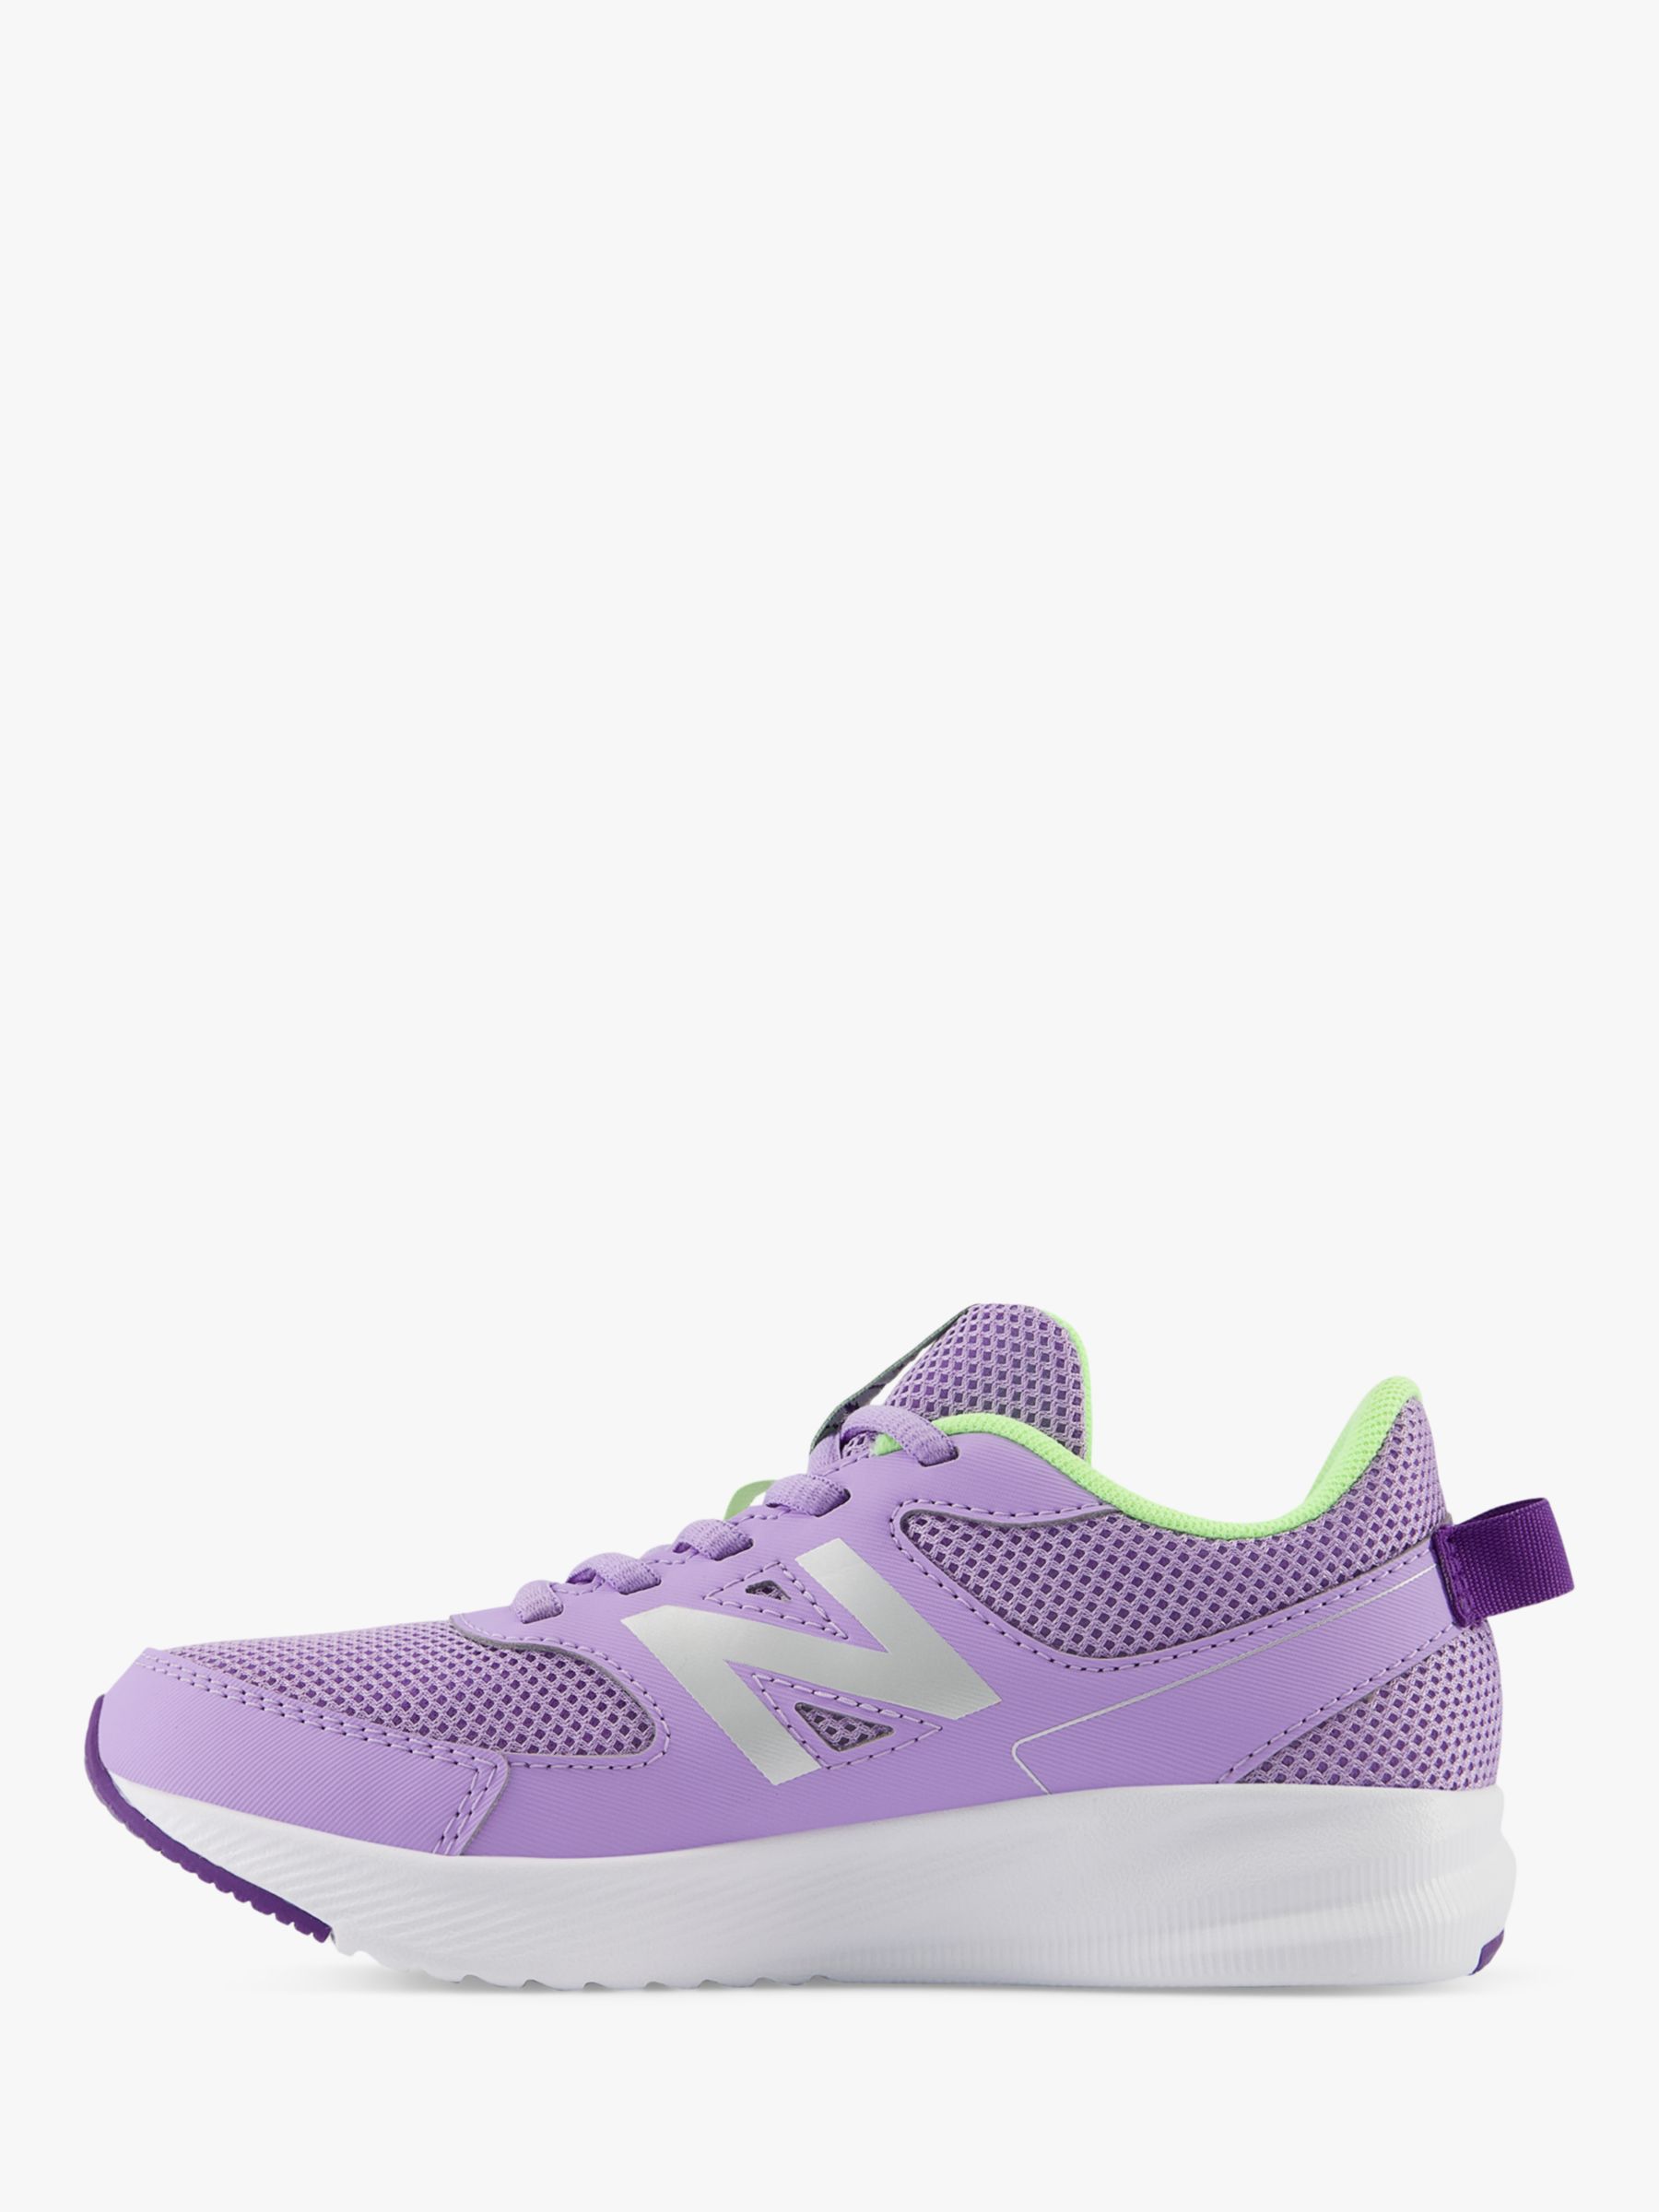 New Balance Kids' 570v3 Lace-Up Trainers, Lilac, 3